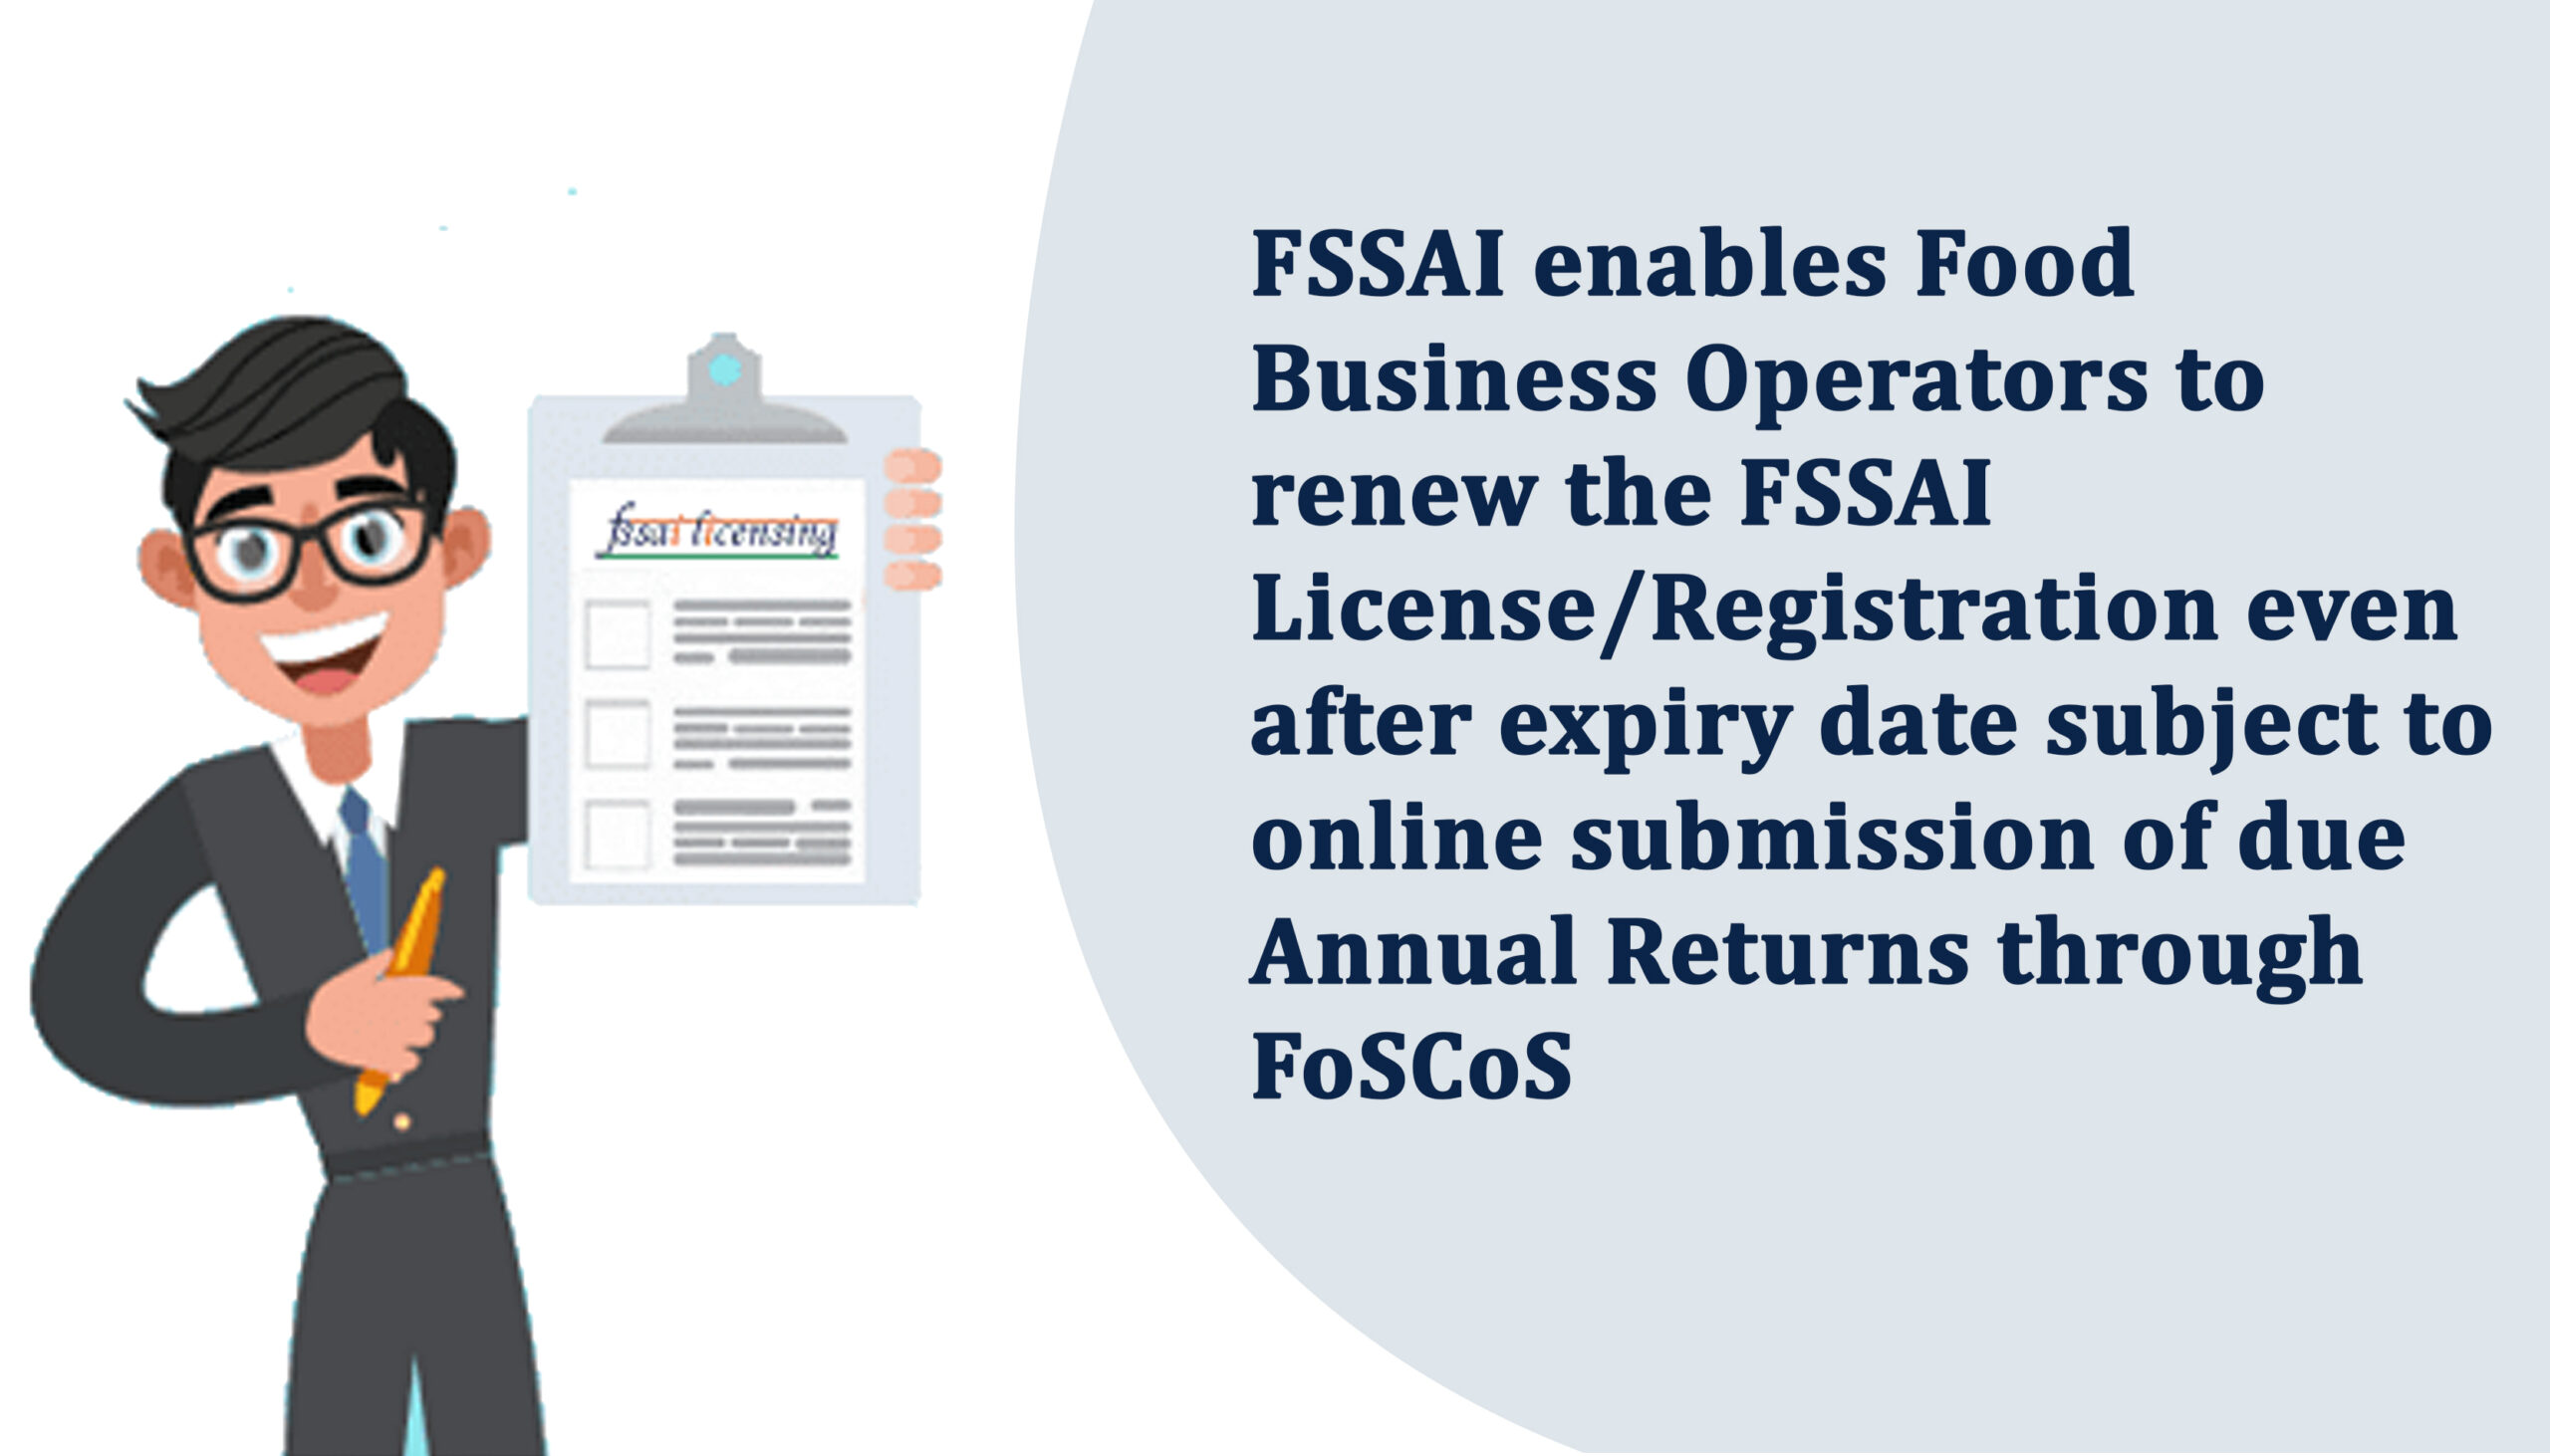 FSSAI enables Food Business Operators to renew the FSSAI LicenseRegistration even after expiry date subject to online submission of due Annual Returns